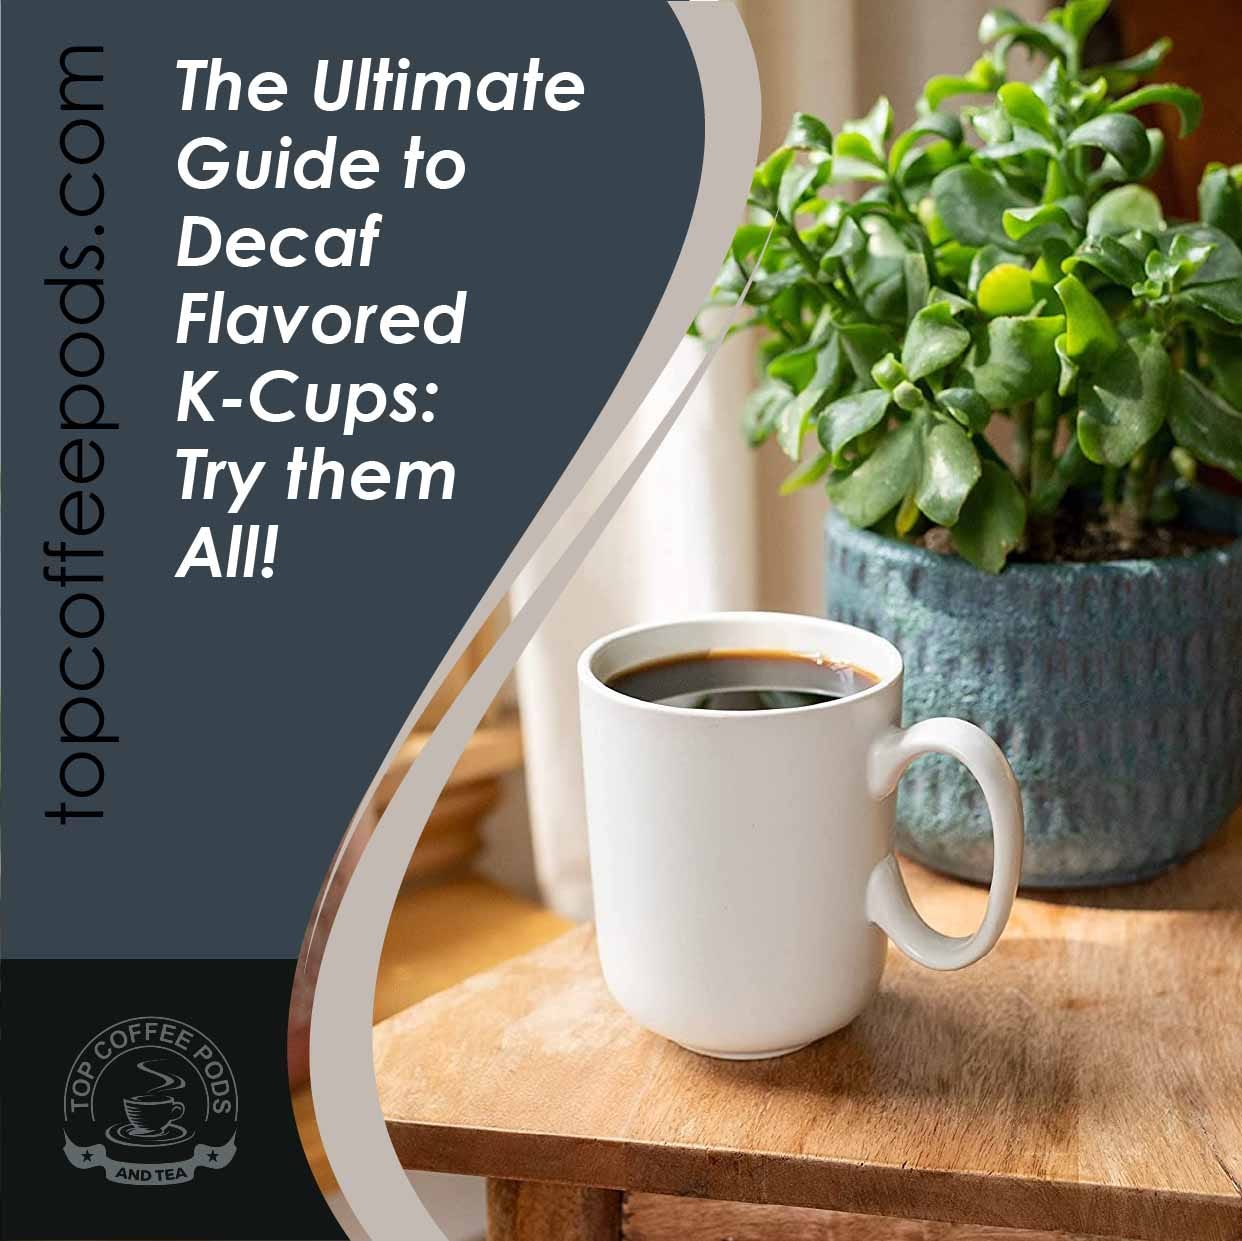 The Ultimate Guide to Decaf Flavored K-Cups: Try them All!